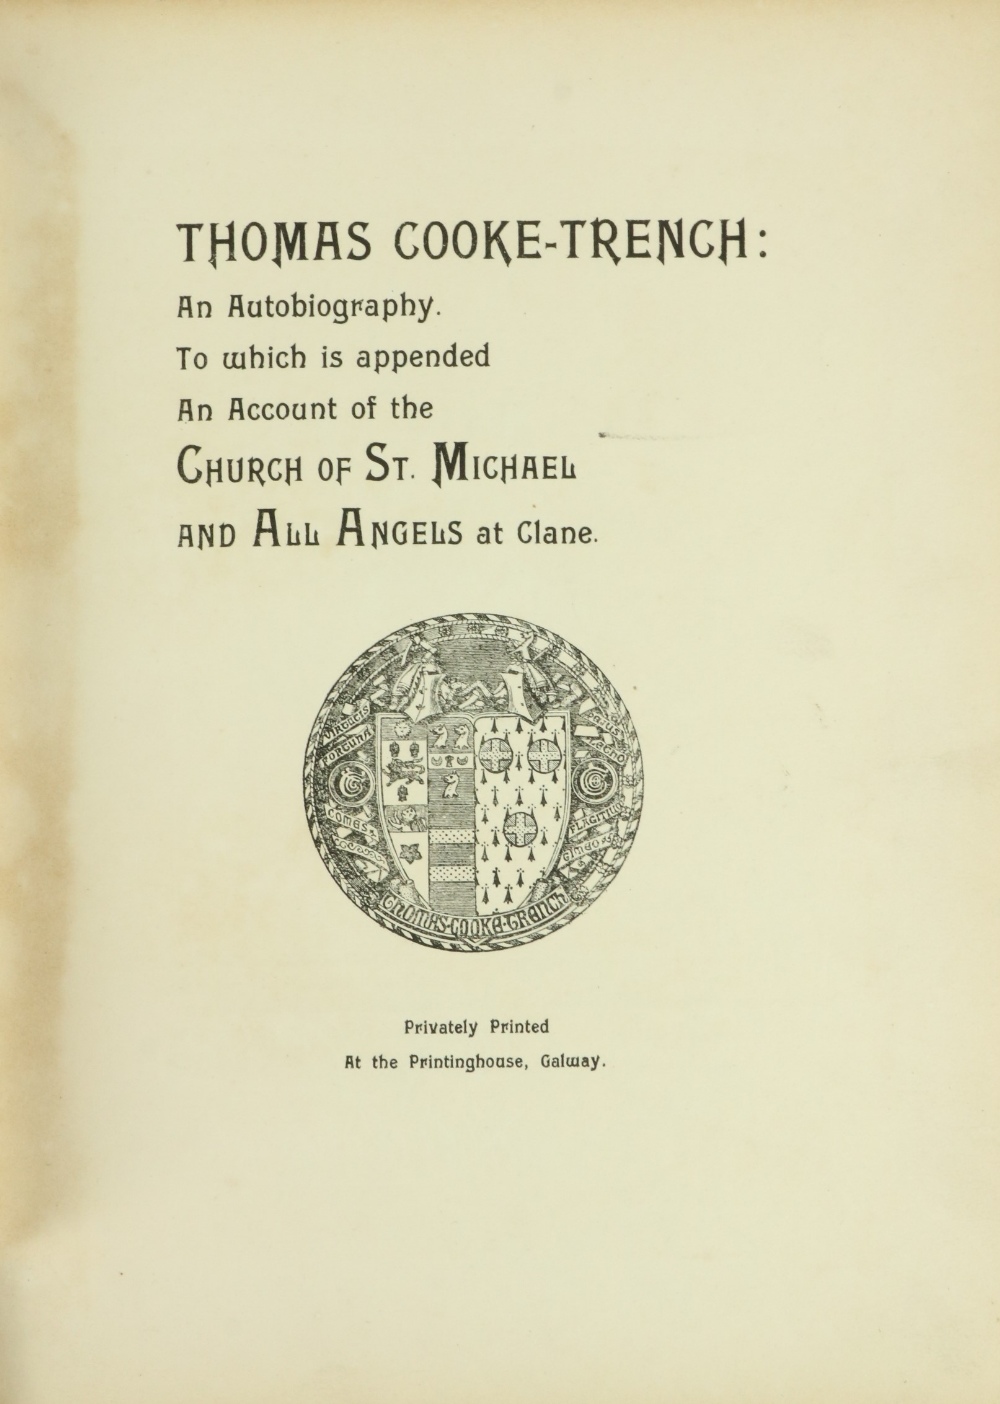 Cooke-Trench (Thos.) An Autobiography to which is appended An Account of the Church of St.